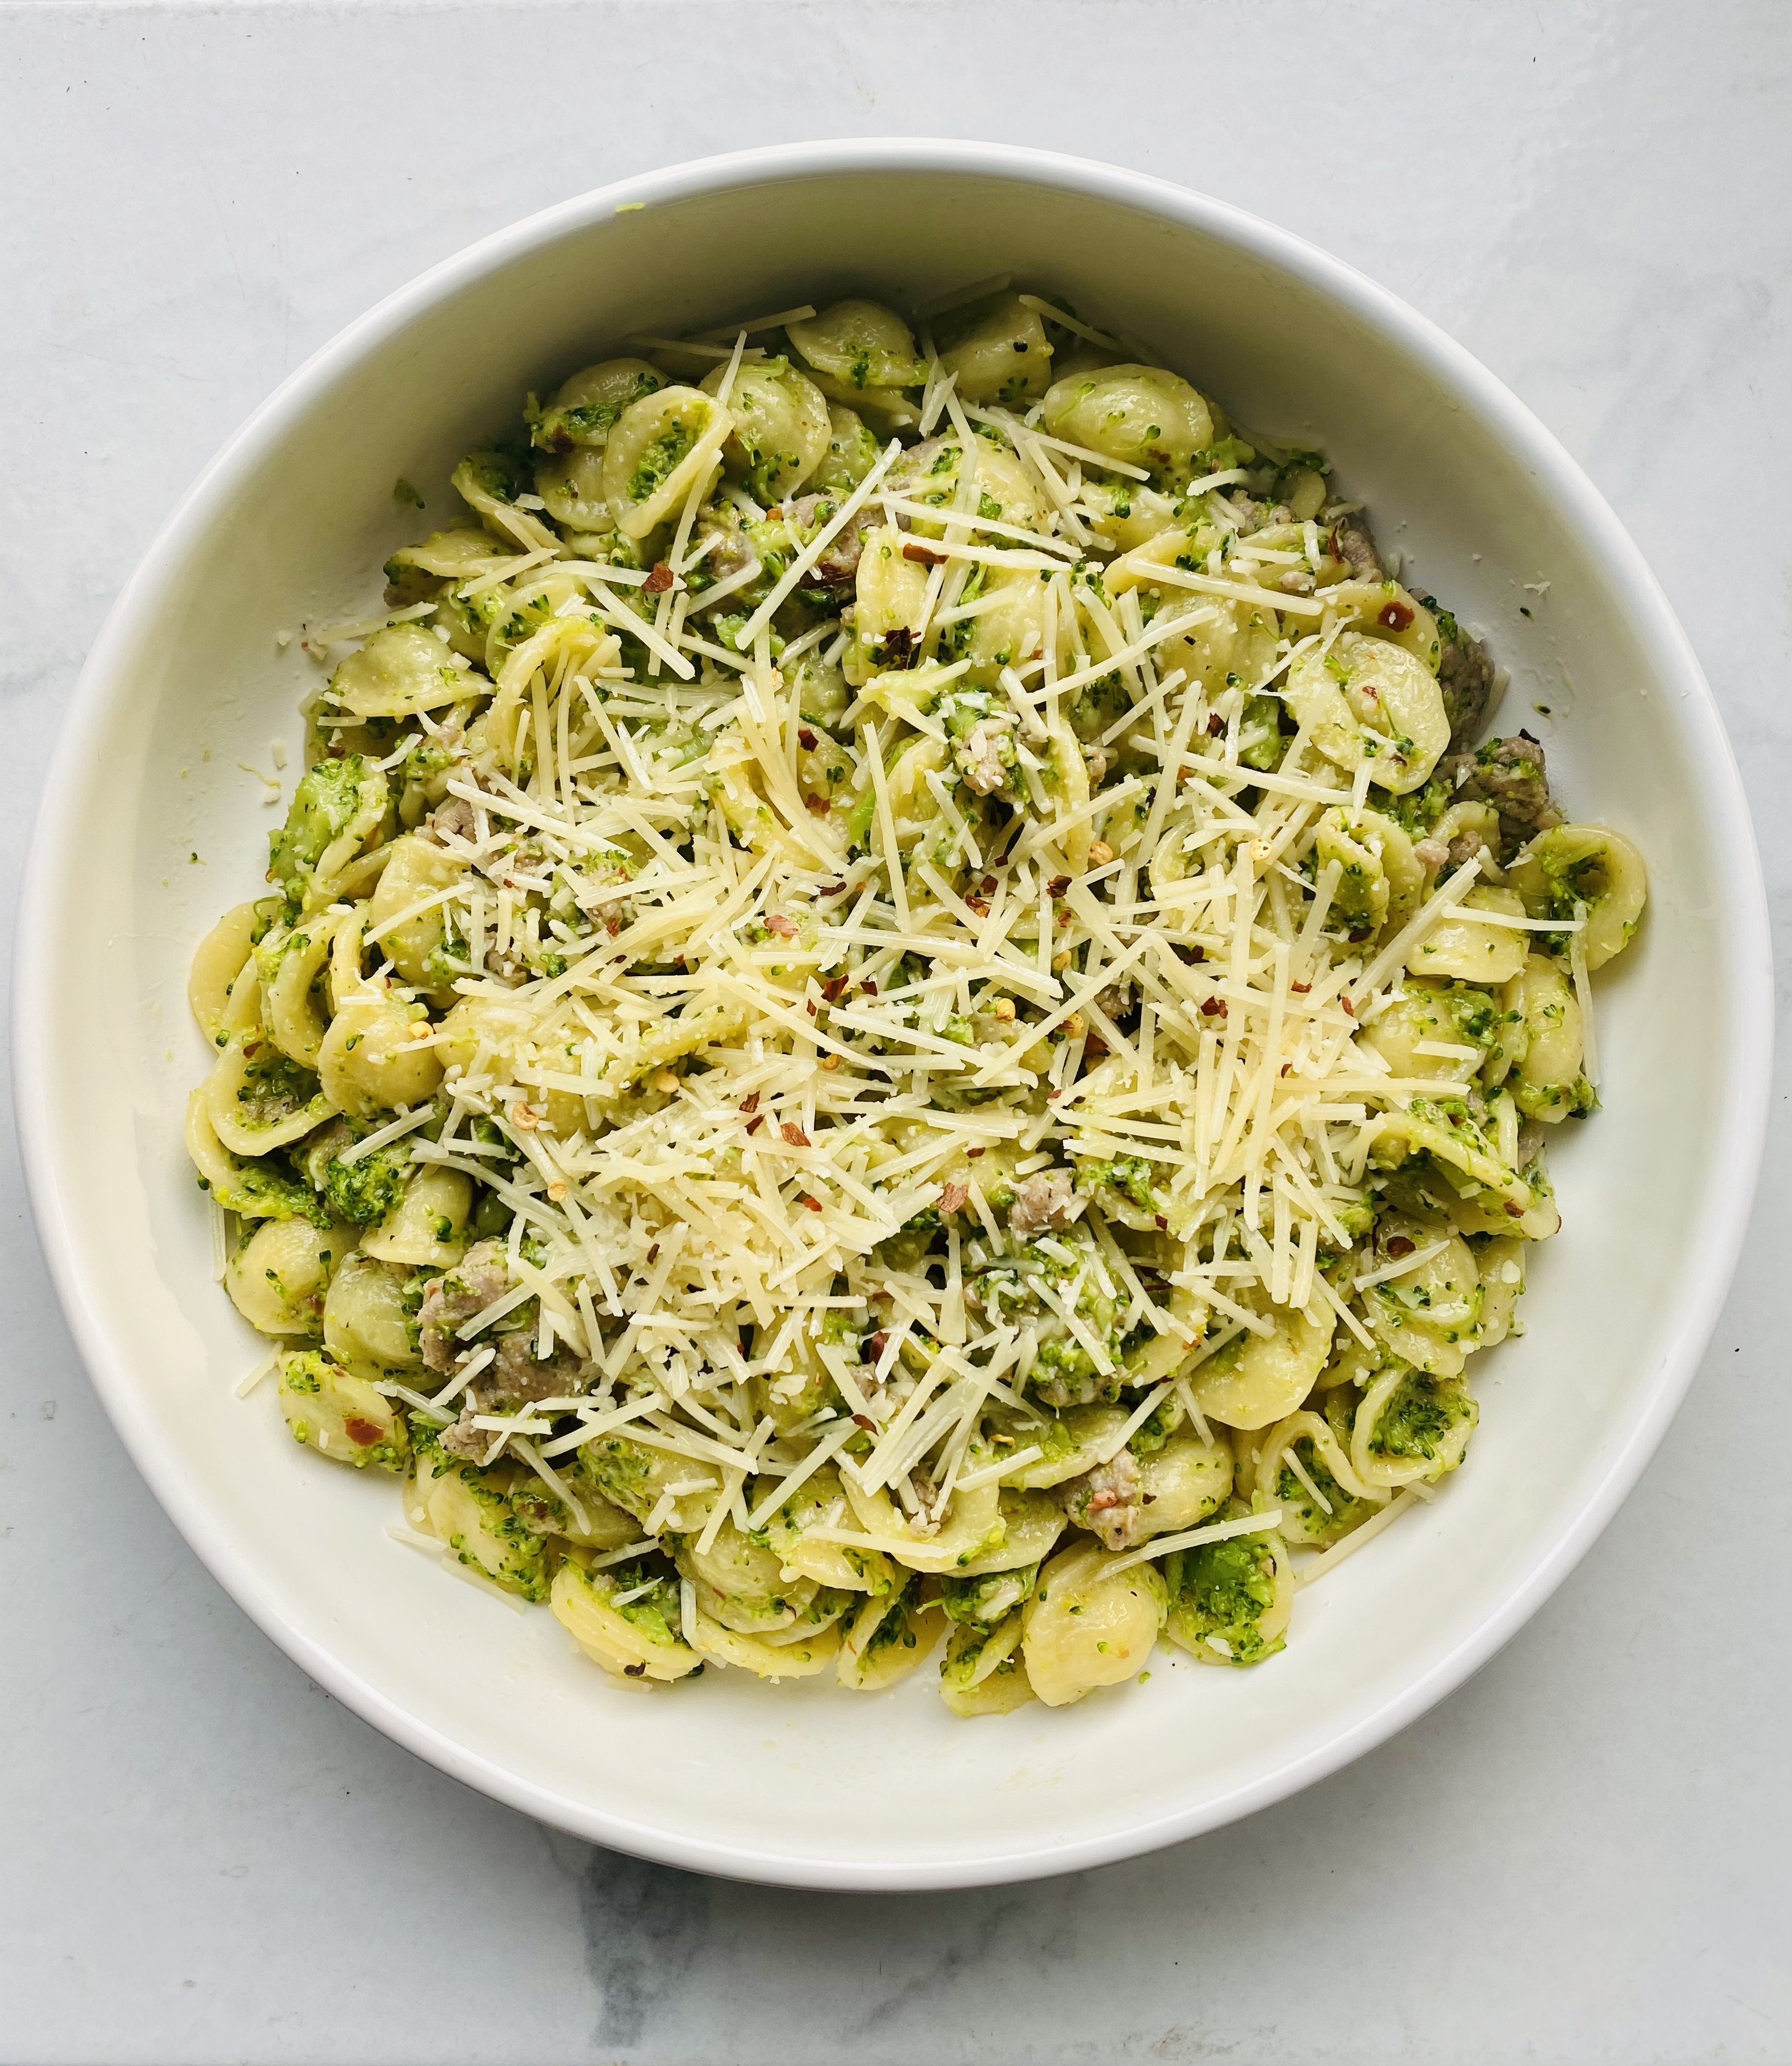 5-Ingredient Recipes - Orecchiette with Broccoli and Sausage